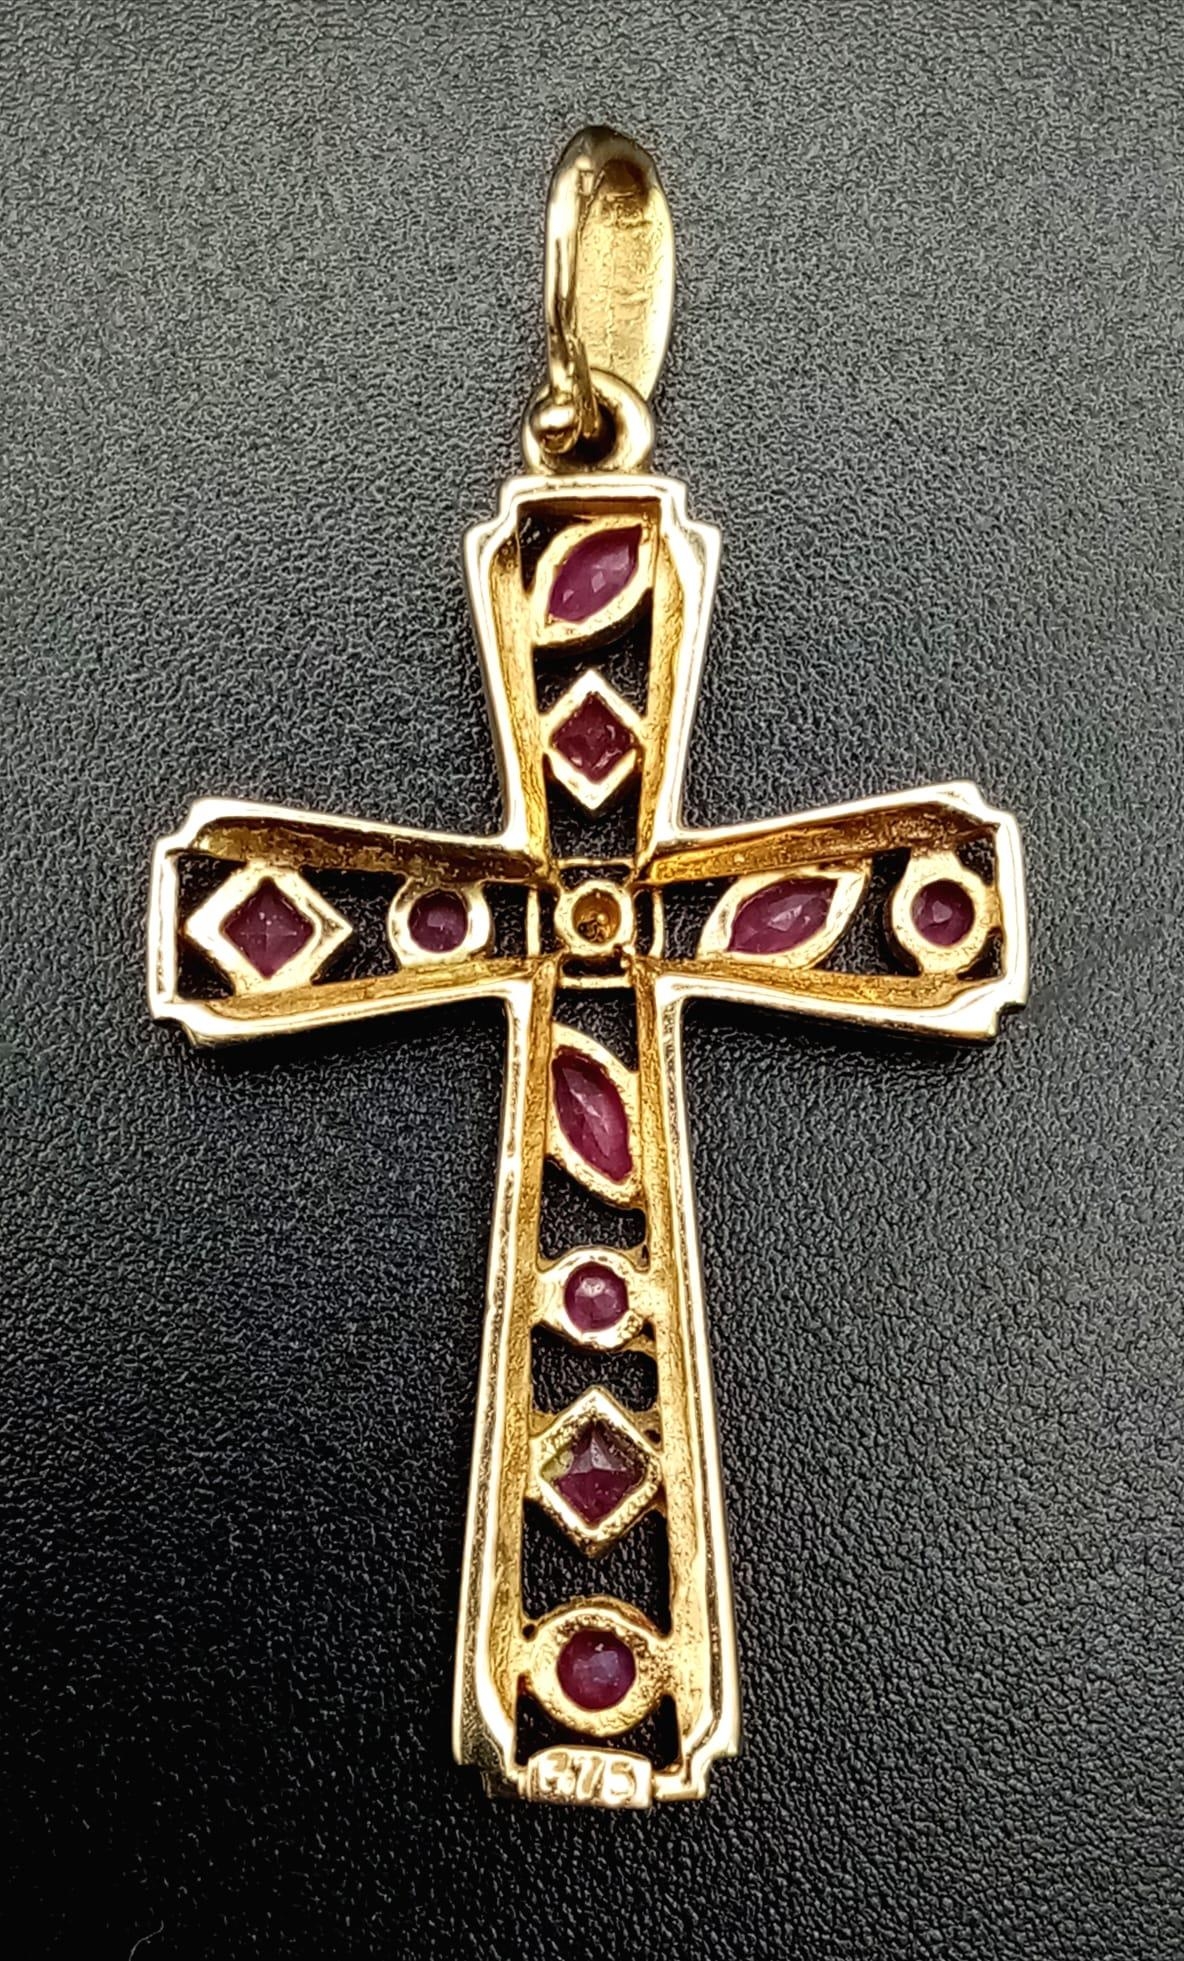 A 9K yellow gold, diamond and ruby set, cross pendant. Length: 29 mm, weight: 1.7 g. - Image 3 of 4